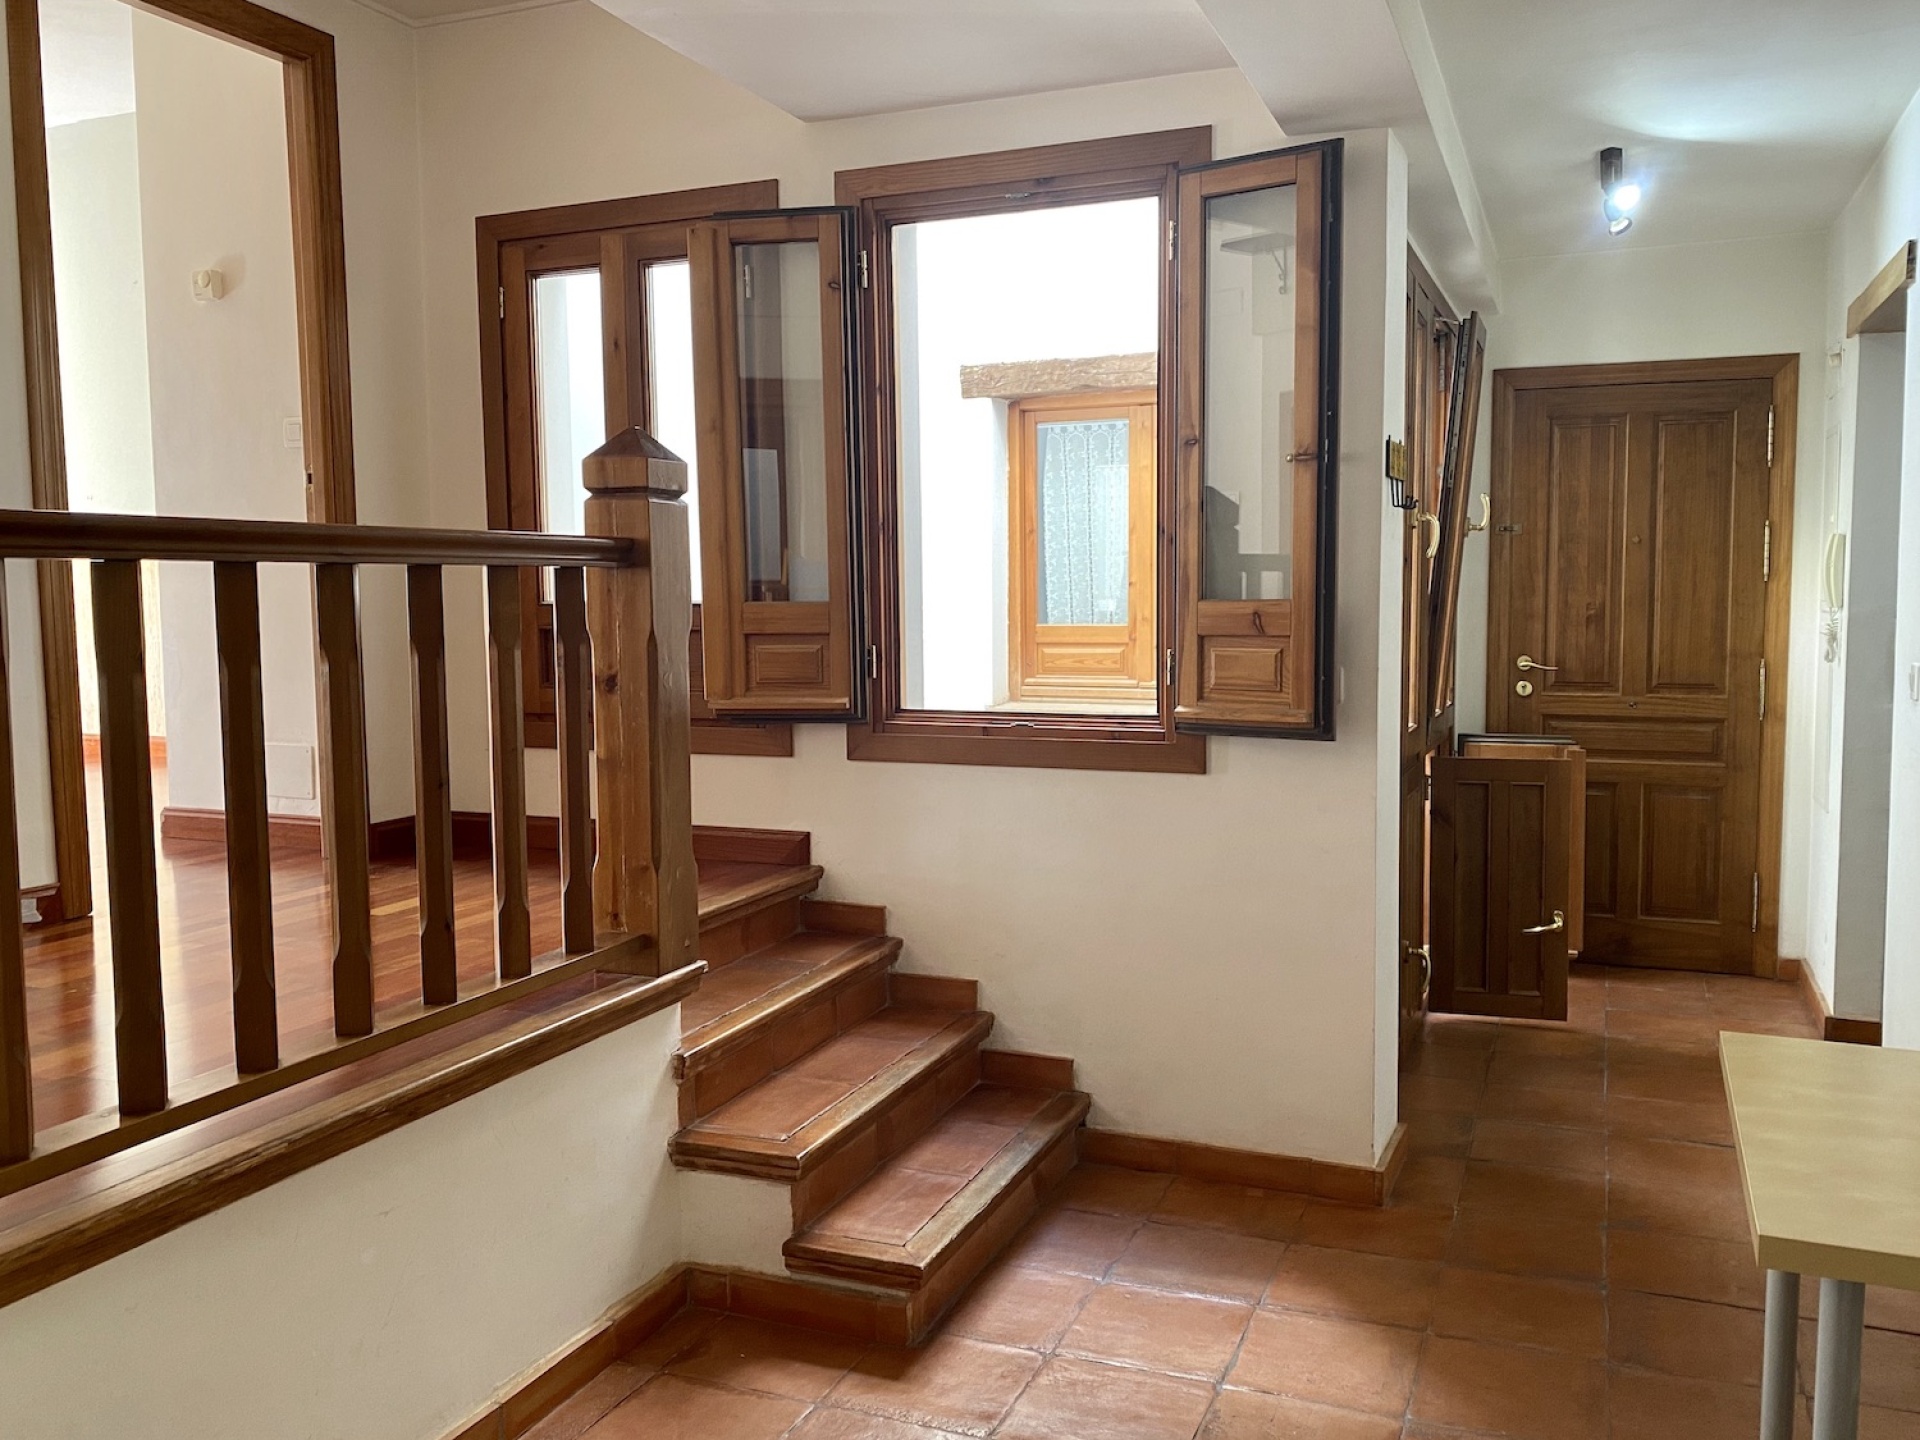 Immaculate Quality-Built Apartment, Albayzin